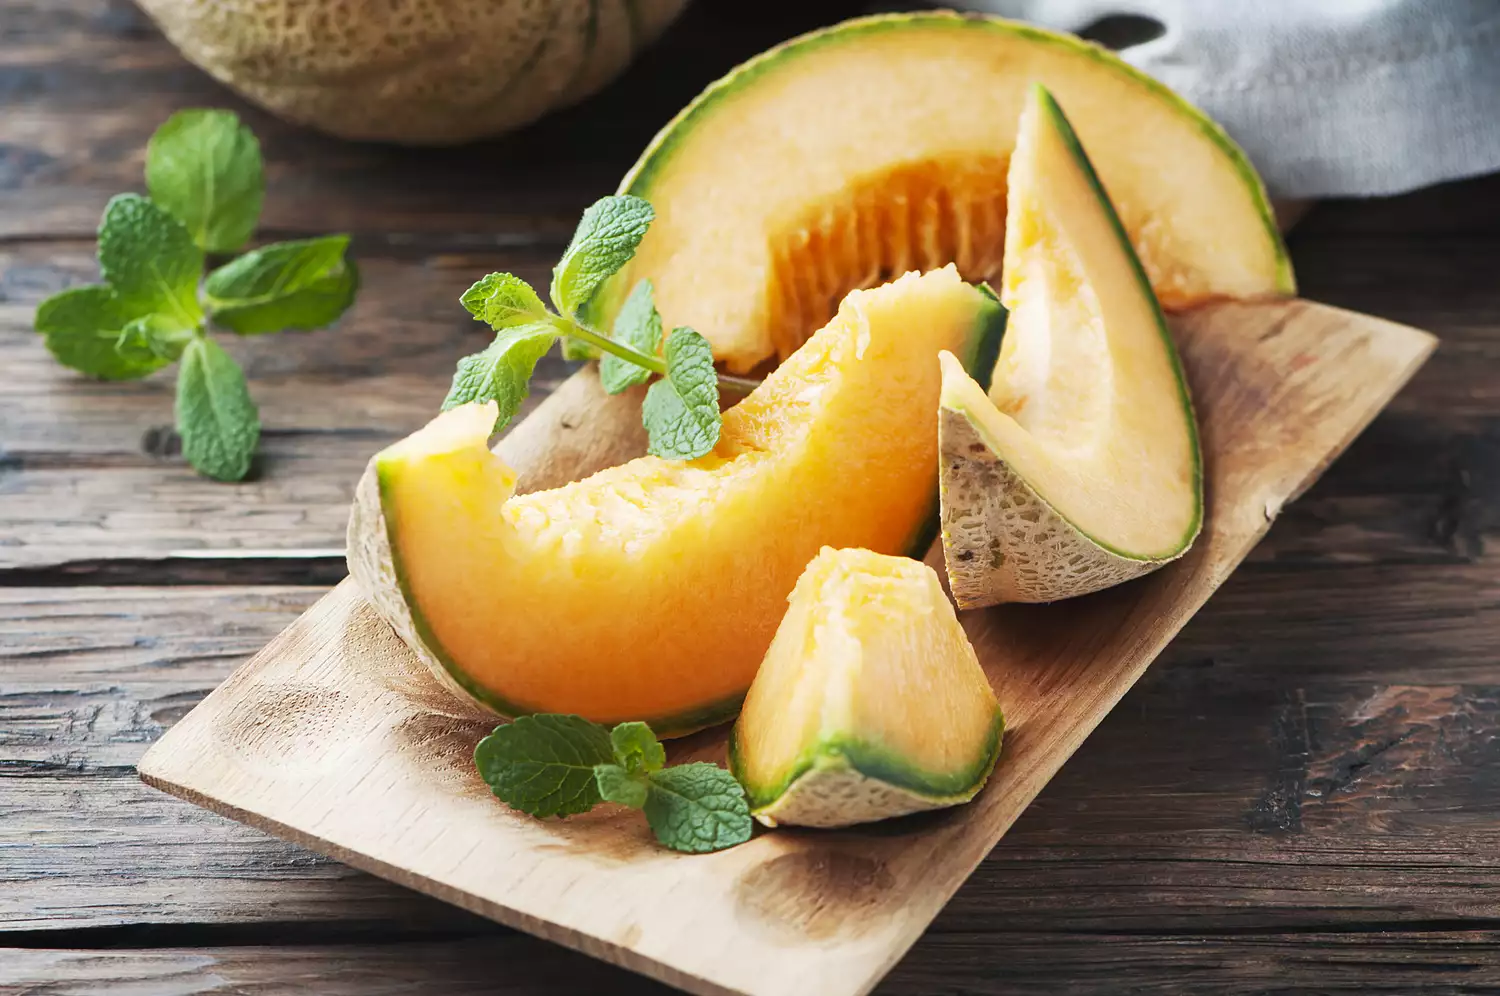 Sliced cantaloupe atop a cutting board, with a few sprigs of mint leaf/